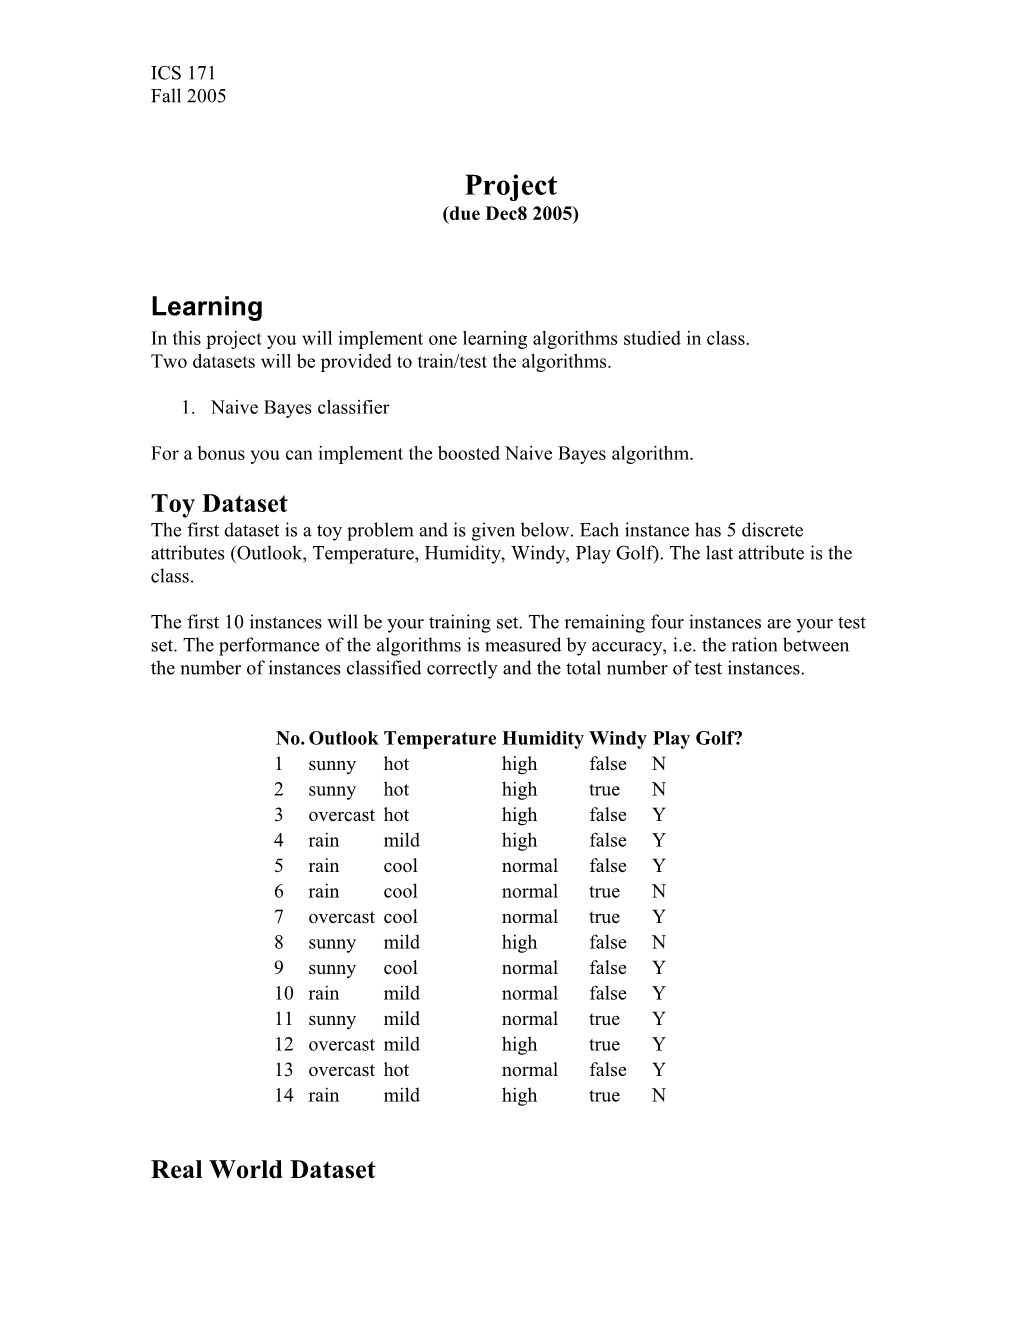 In This Project You Will Implement One Learning Algorithms Studied in Class